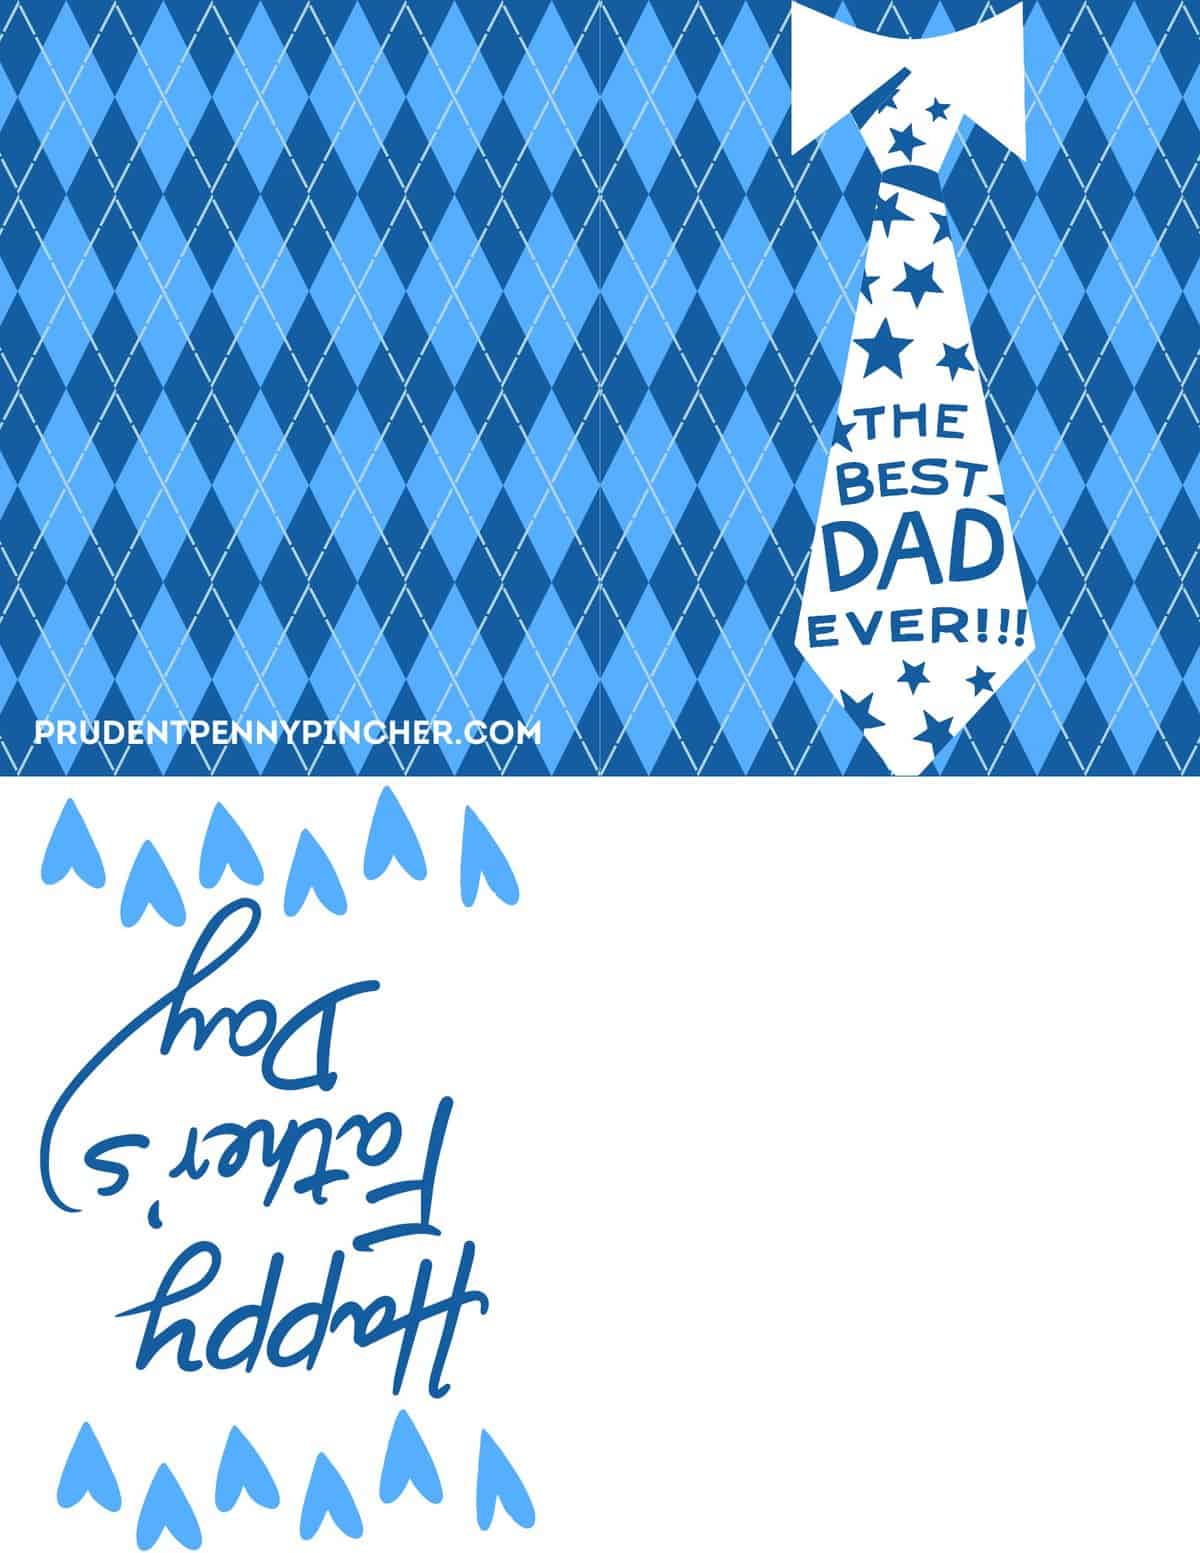 Best Dad Ever tie printable card for Father's Day 